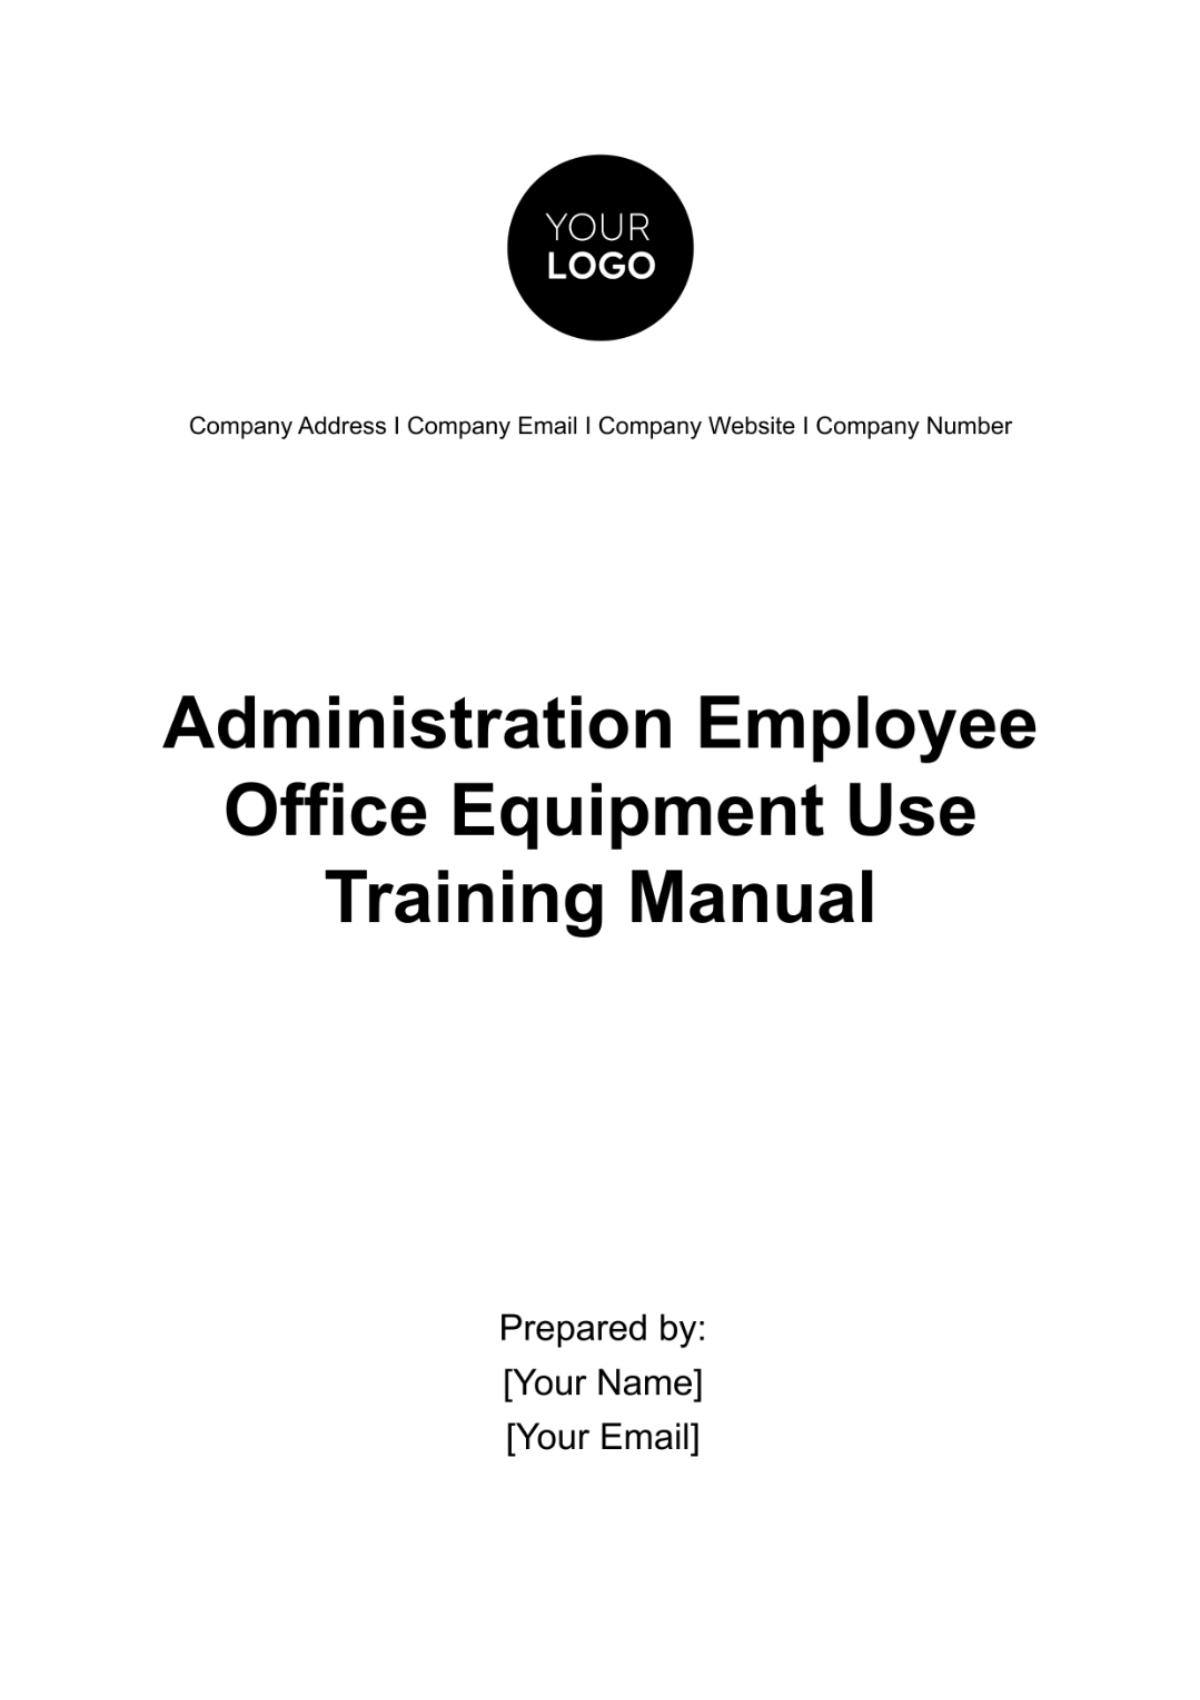 Administration Employee Office Equipment Use Training Manual Template